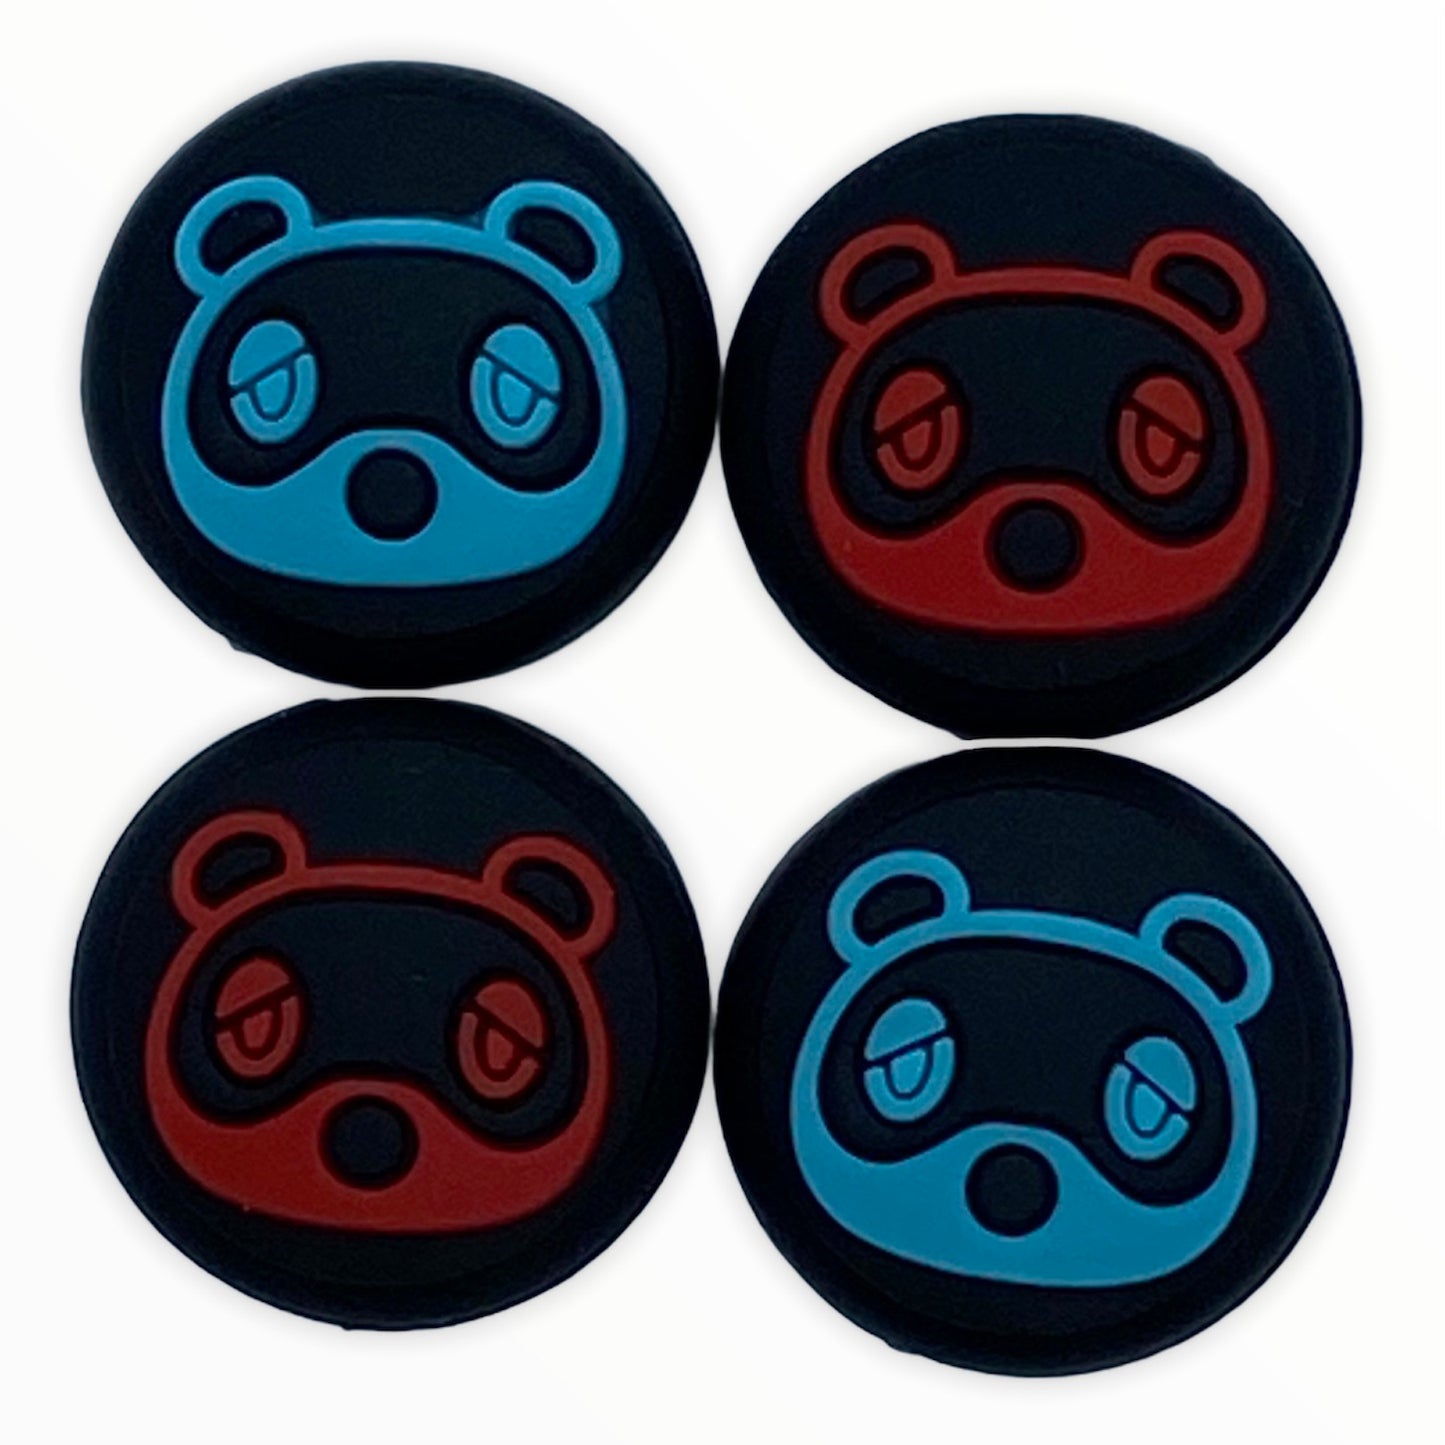 JenDore Green Blue Red & Black 4Pcs Raccoon Silicone Thumb Grip Caps for Nintendo Switch